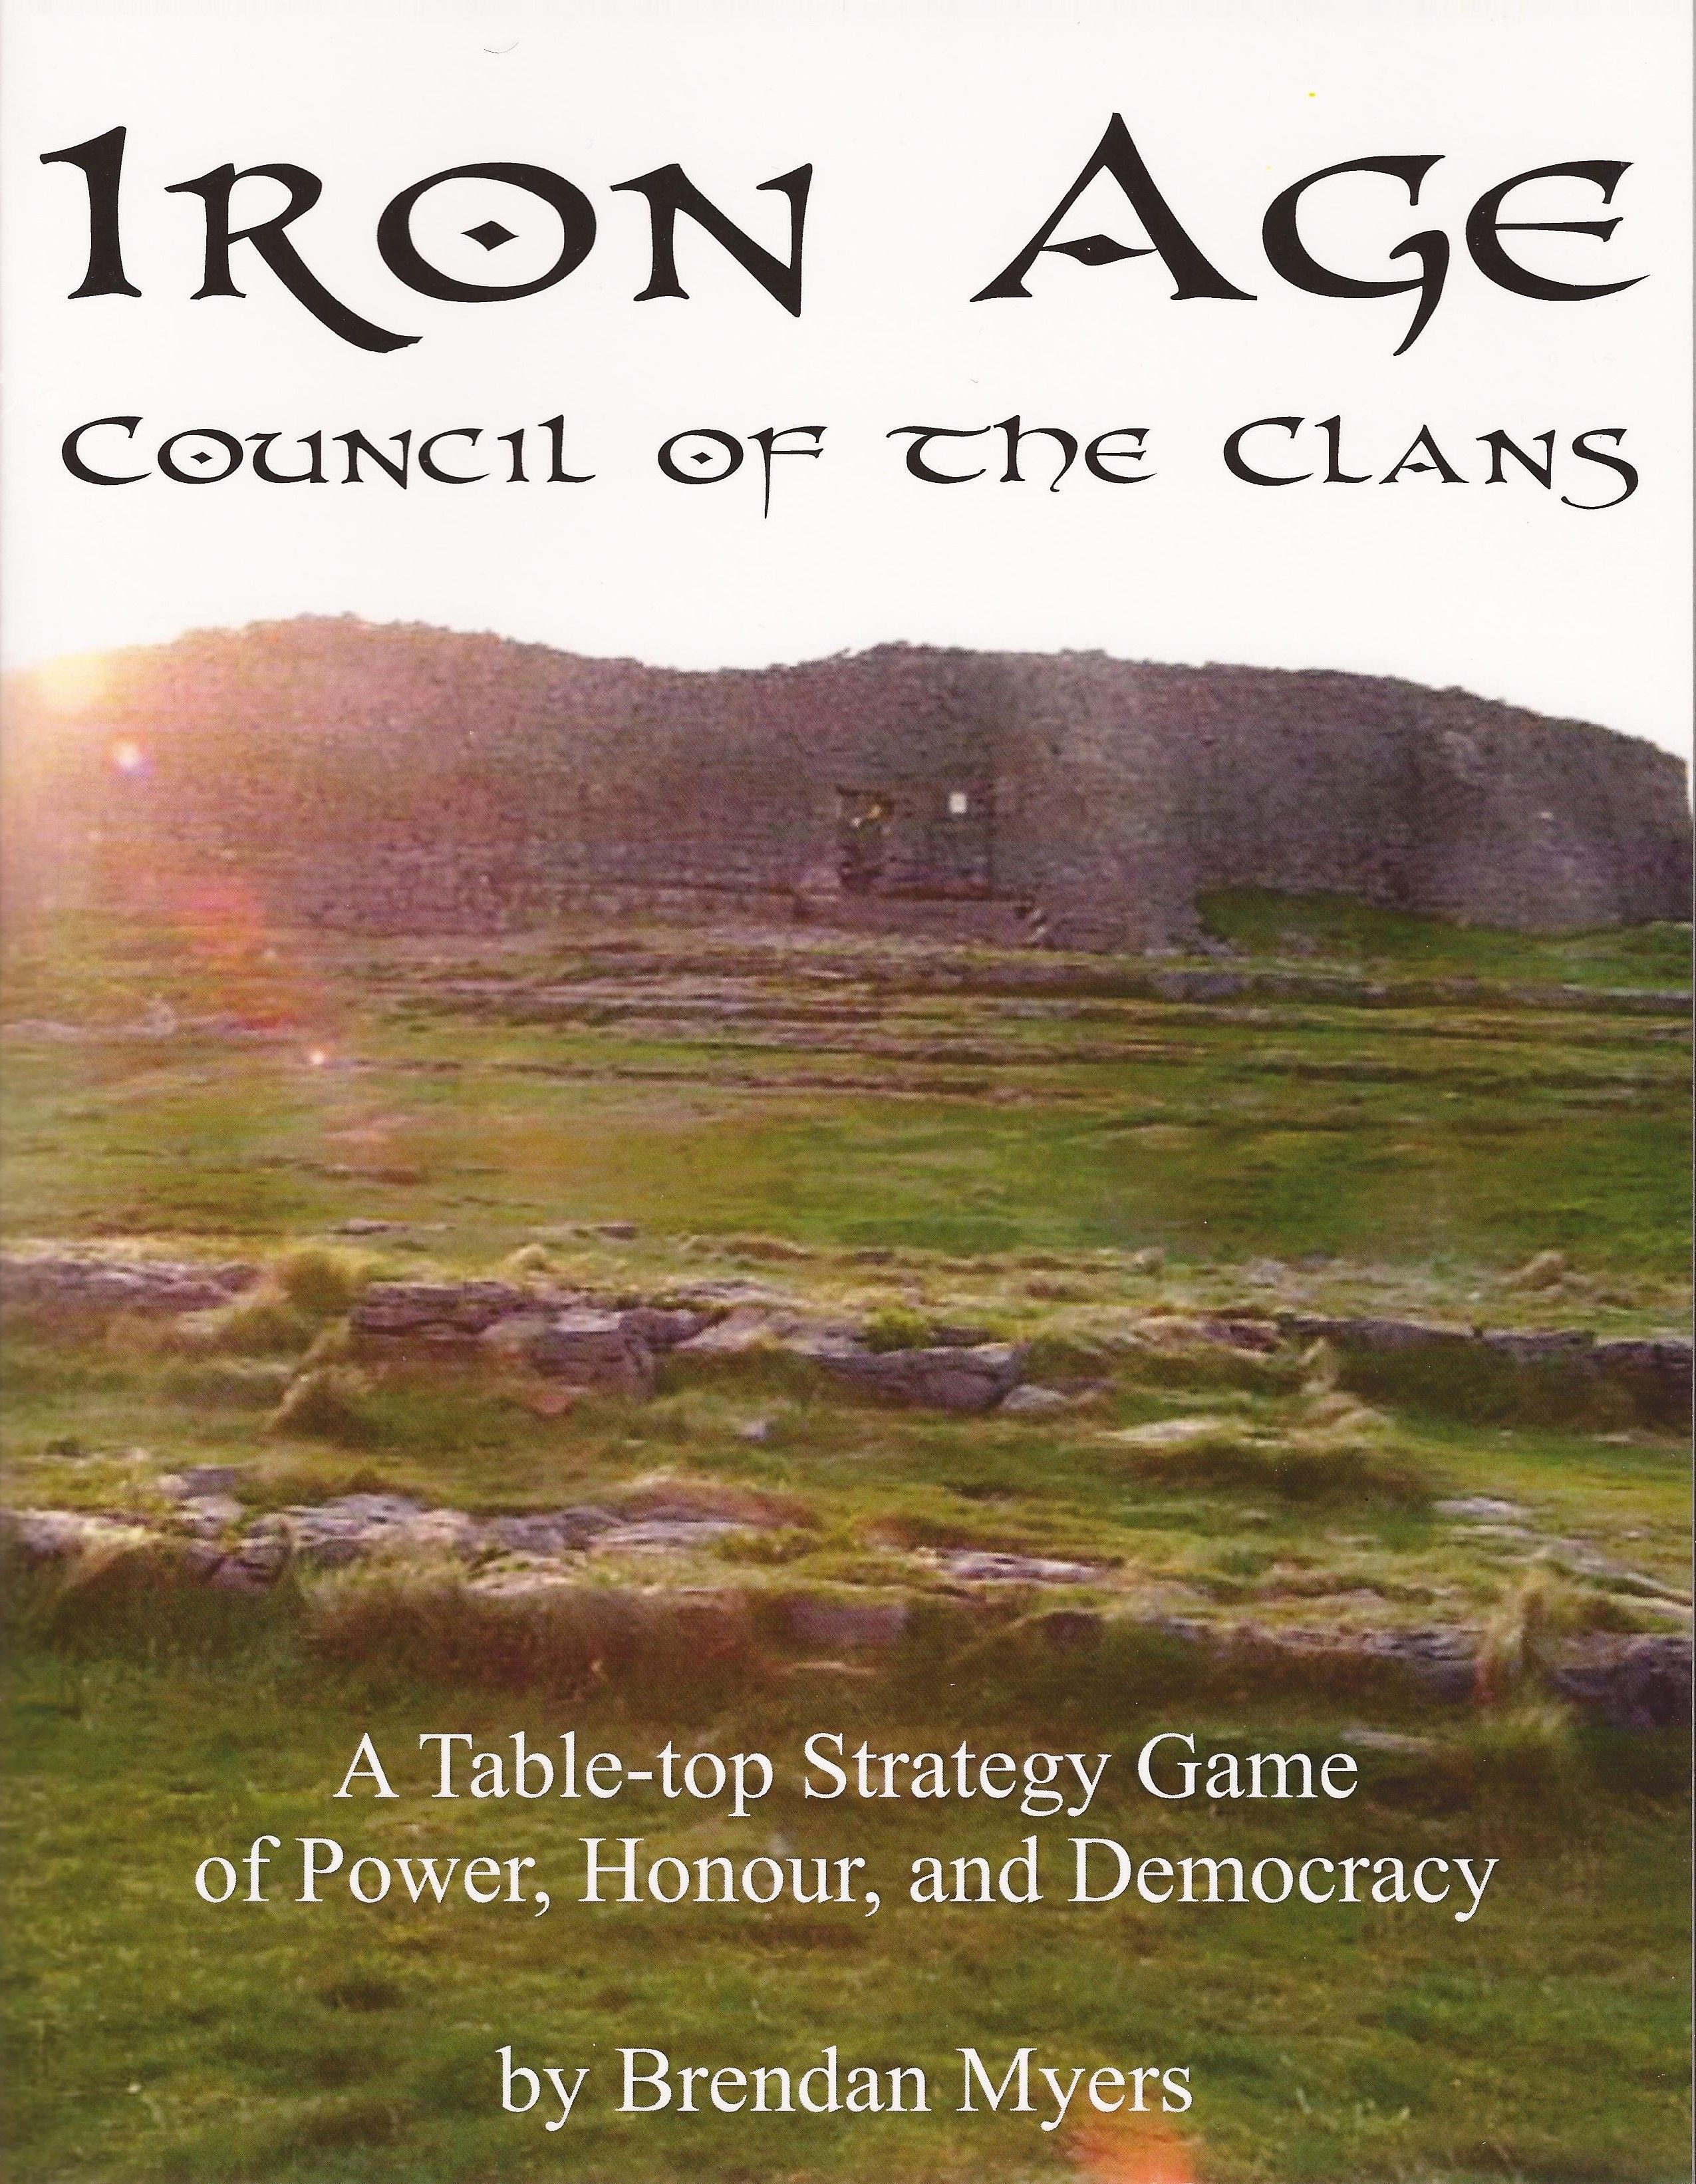 Iron Age: Council of the Clans